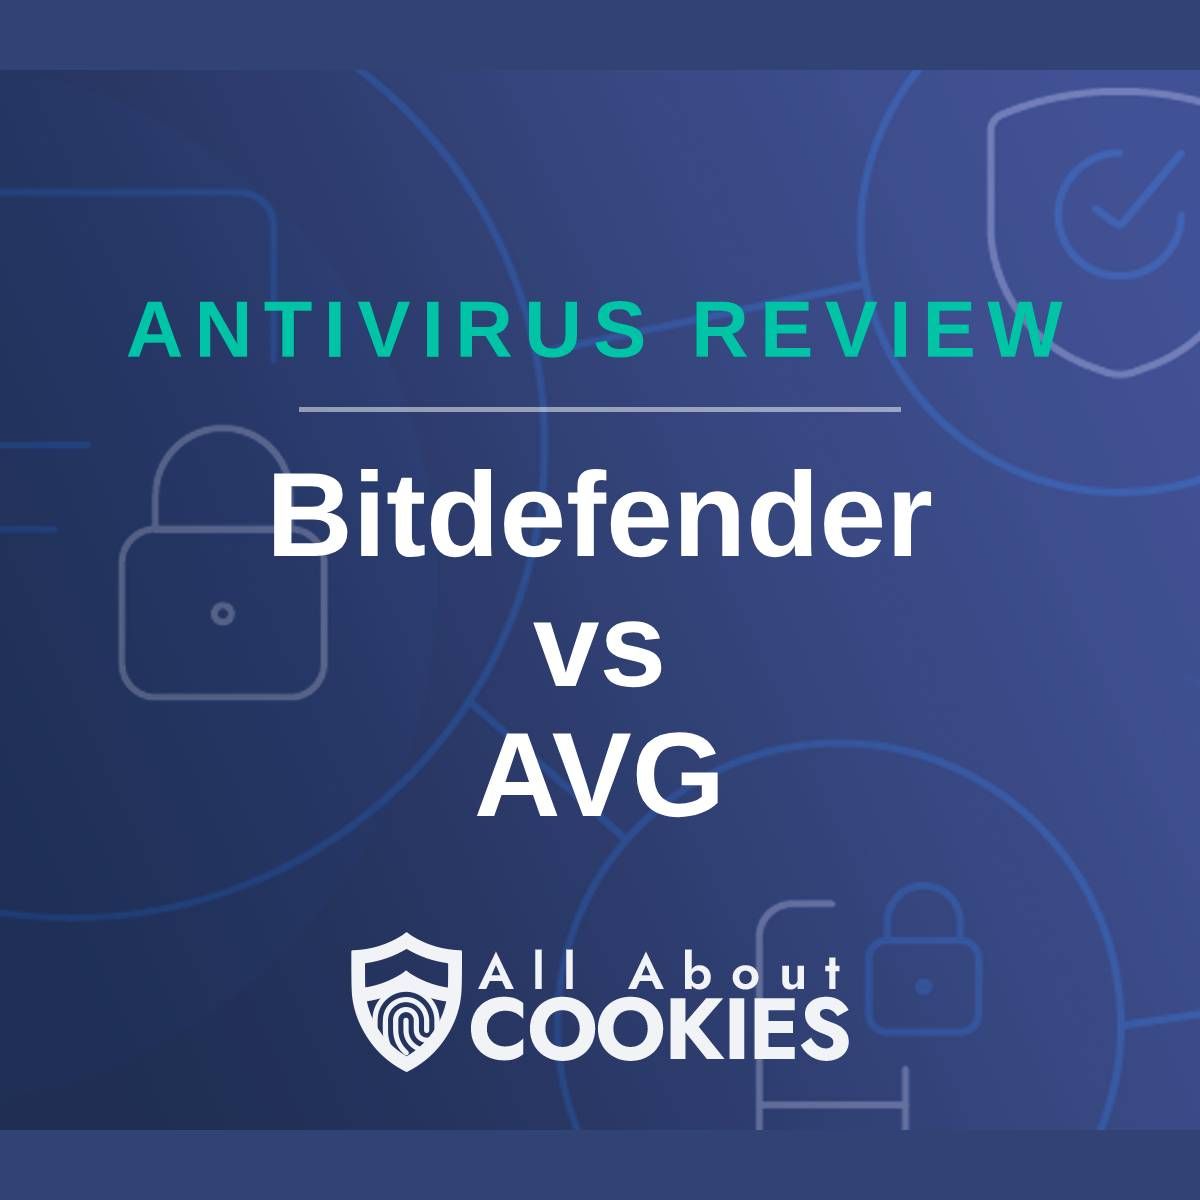 A blue background with images of locks and shields with the text &quot;Antivirus Review Bitdefender vs AVG&quot; and the All About Cookies logo. 